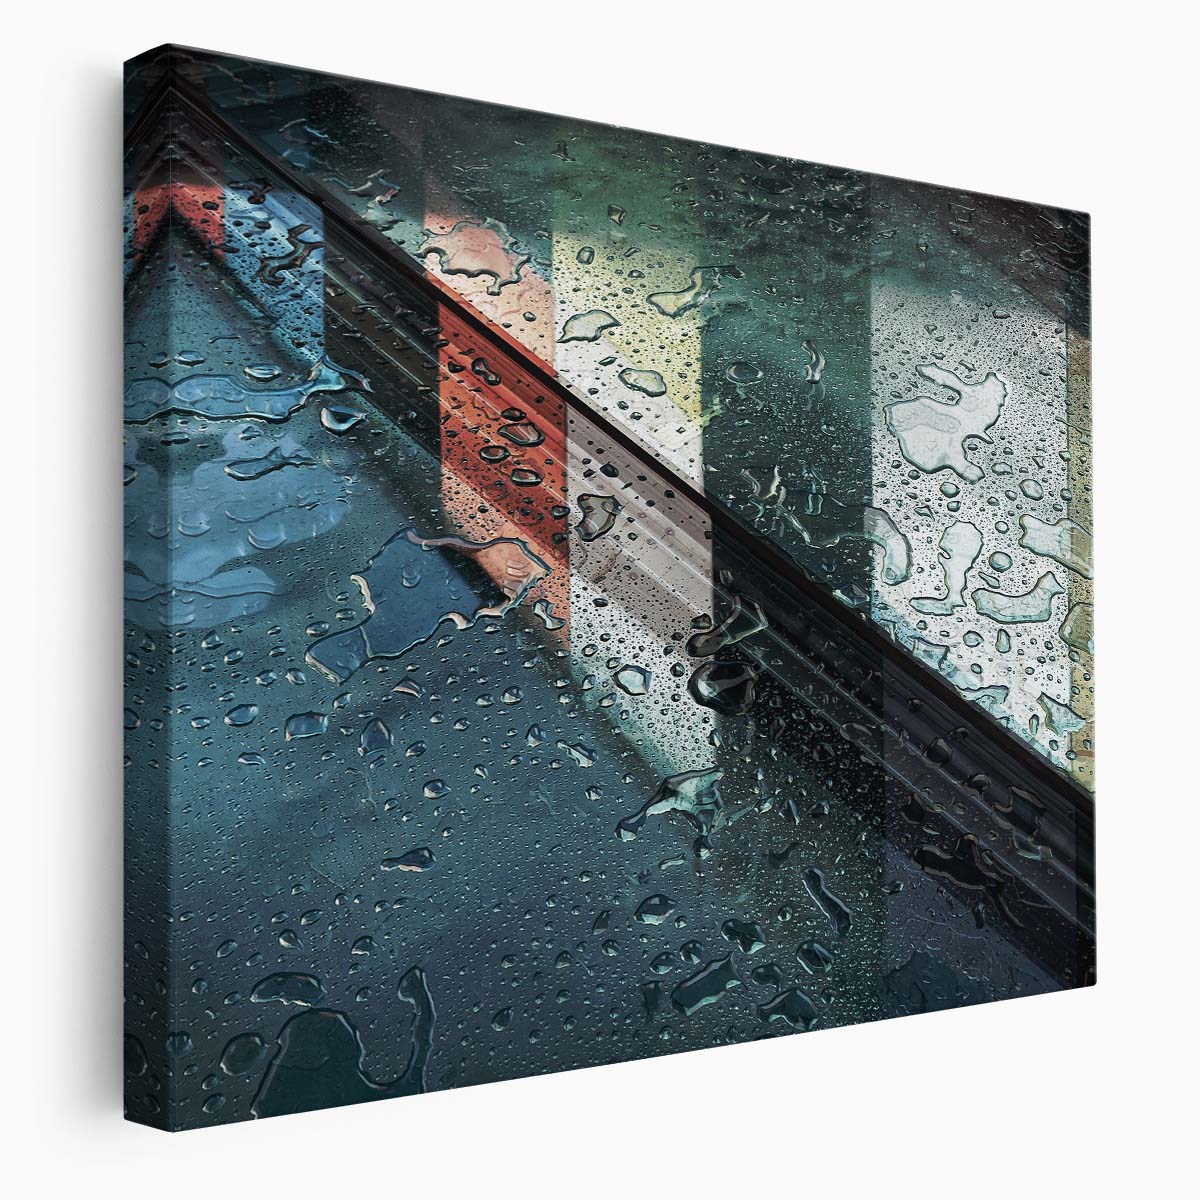 Colorful Reflections & Lines Architecture Wall Art by Luxuriance Designs. Made in USA.